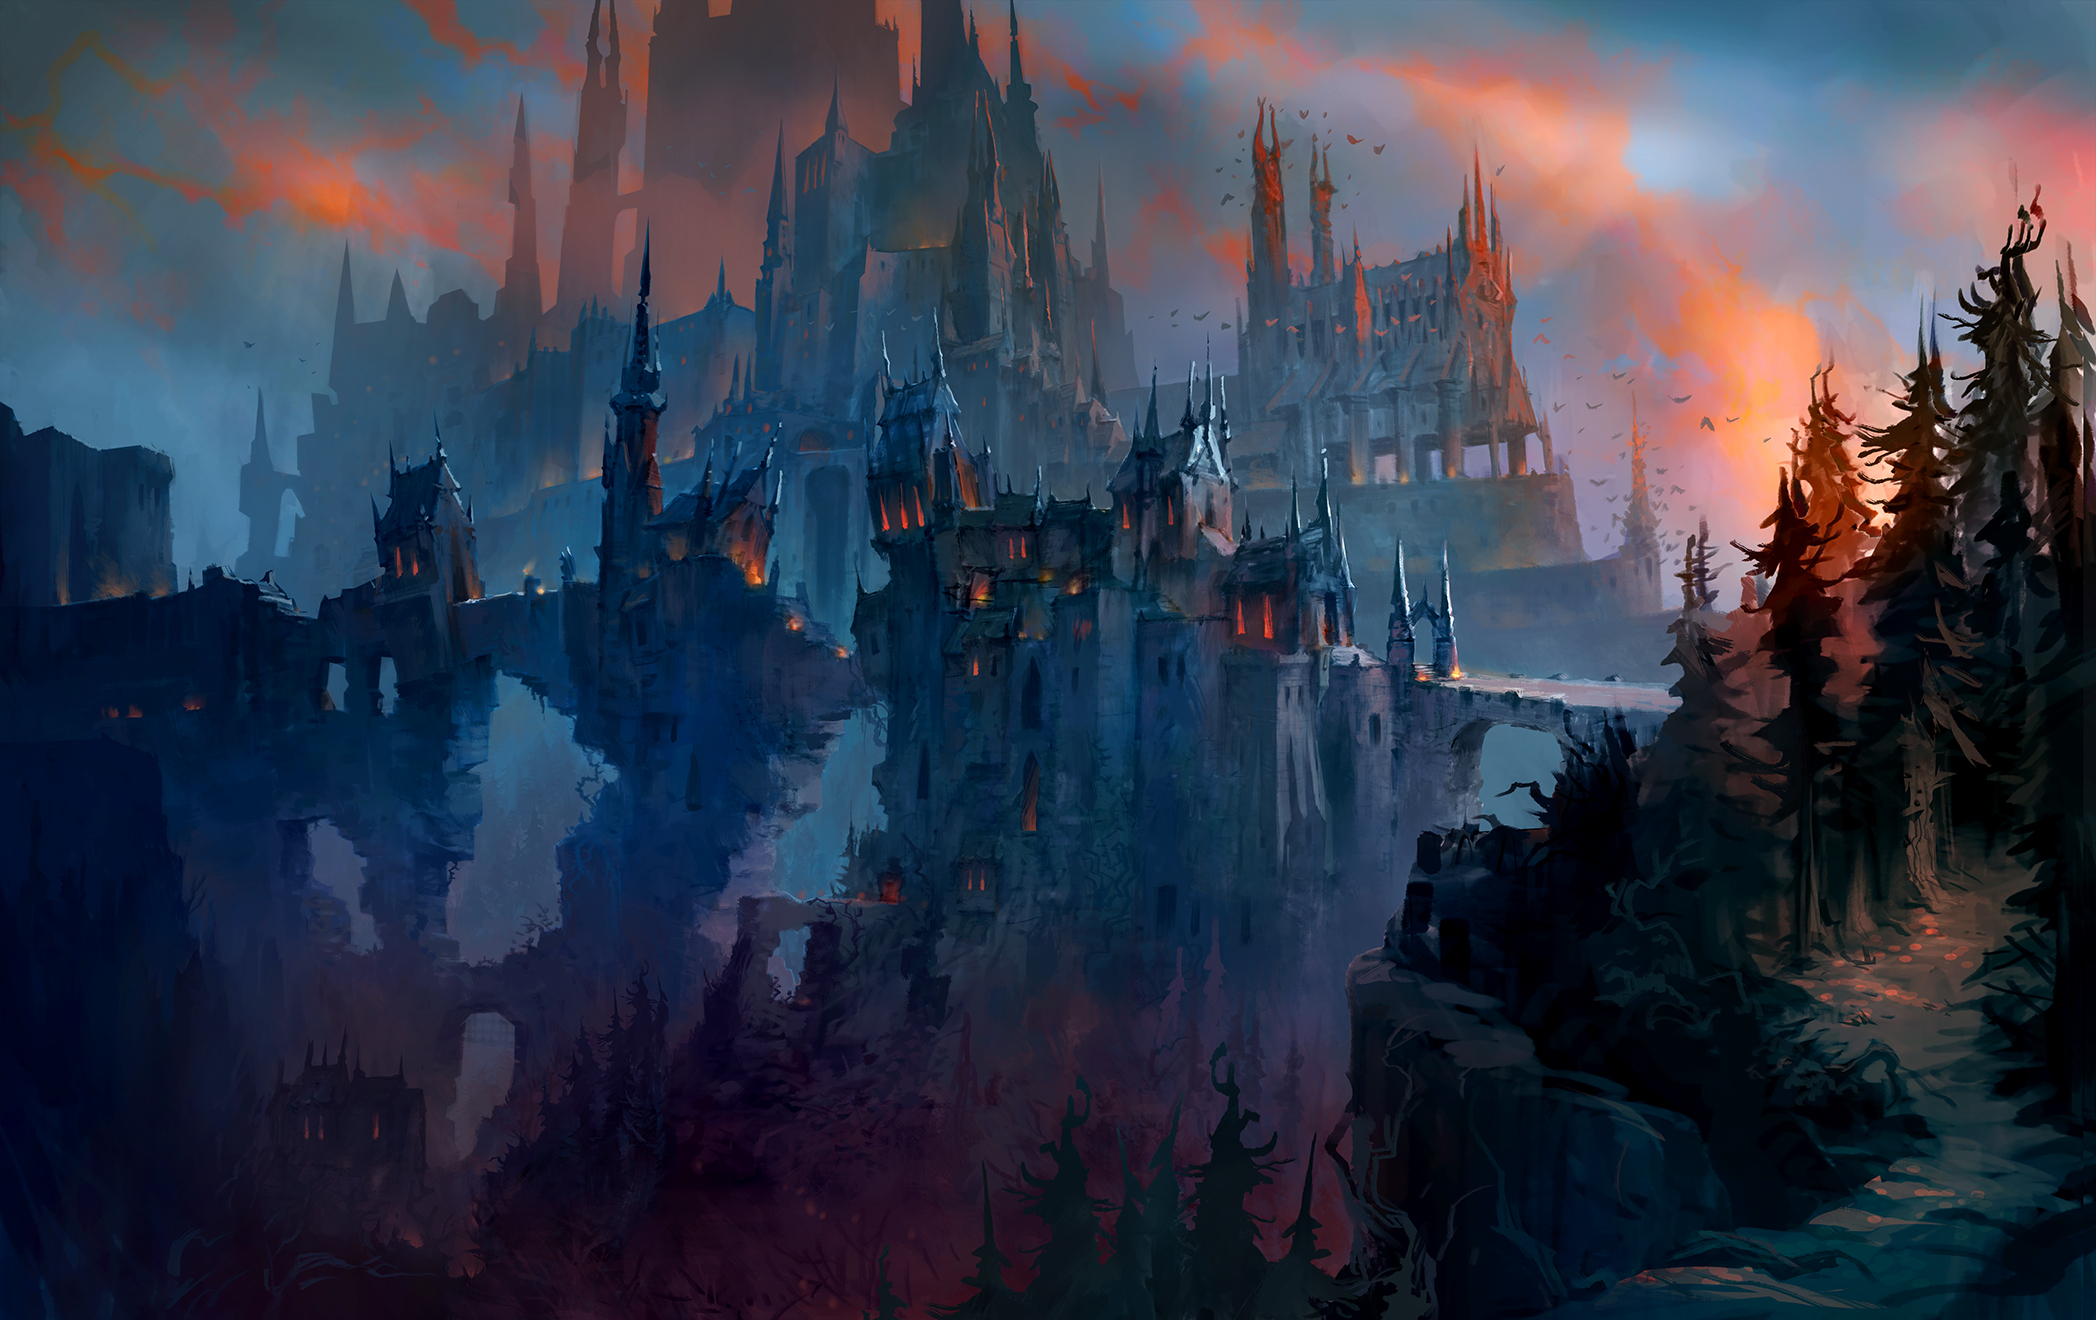 World of Warcraft Shadowlands 2020 Wallpapers